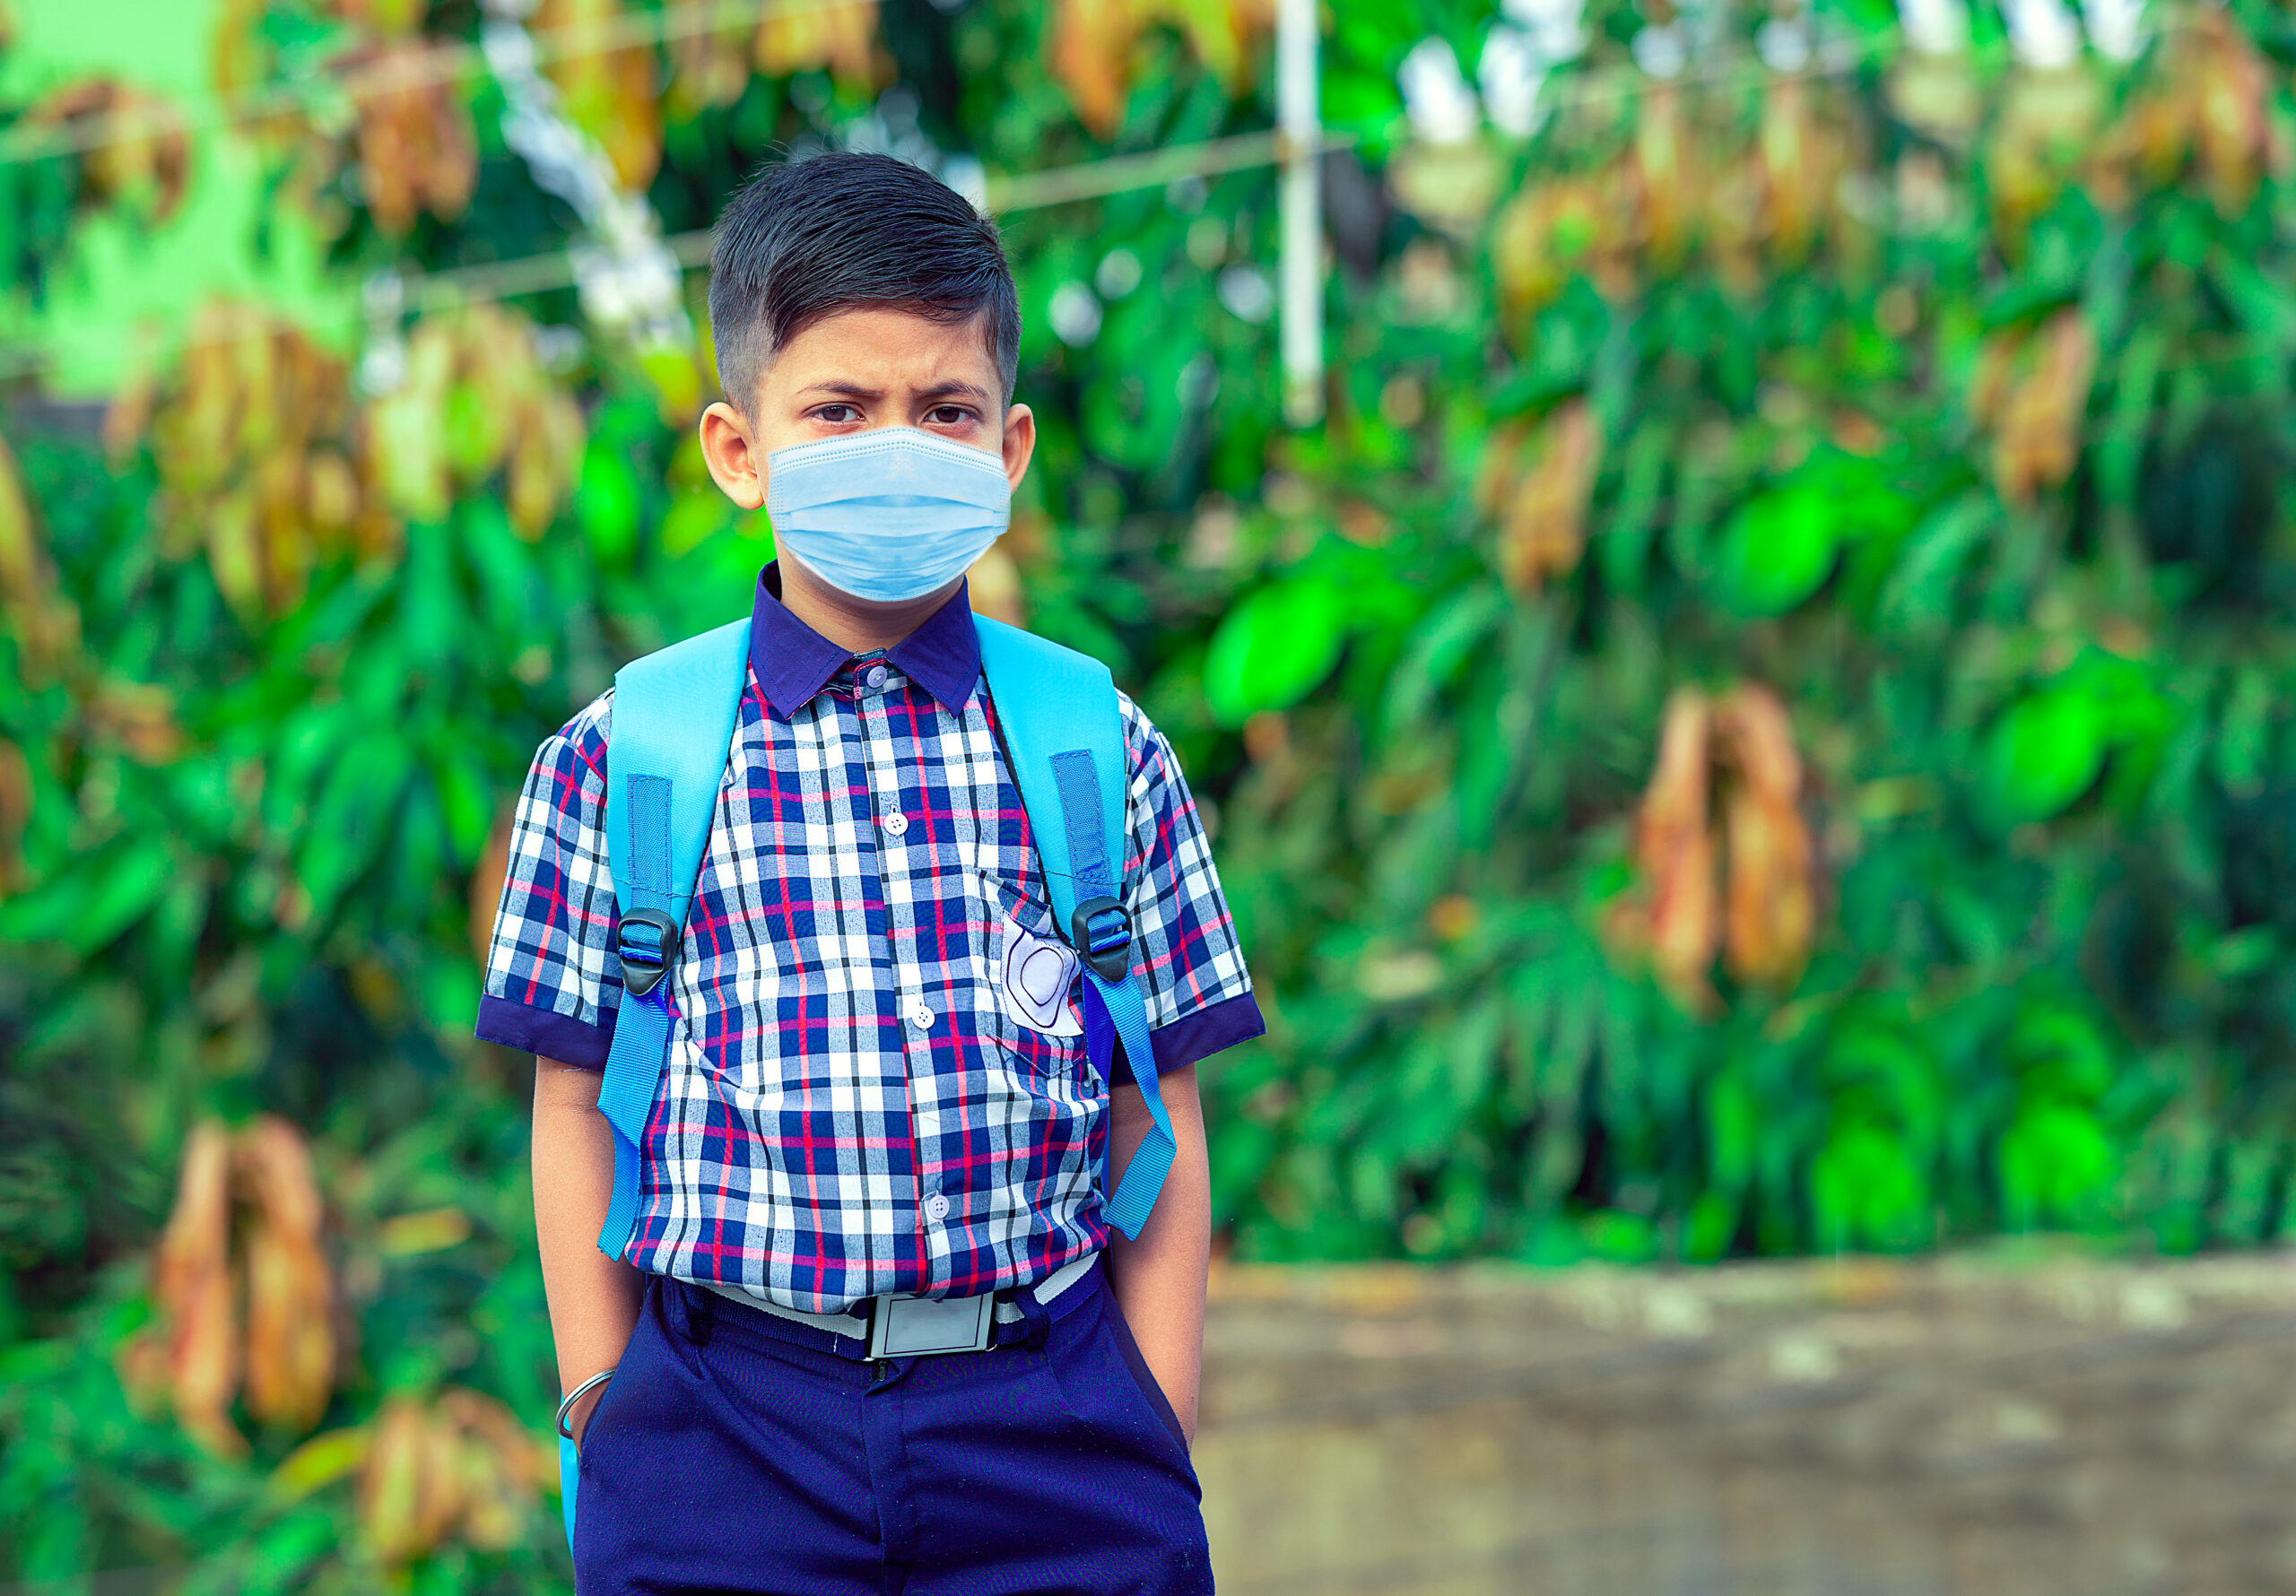 Little,Student,Boy,Wearing,School,Uniform,And,Face,Mask,Going